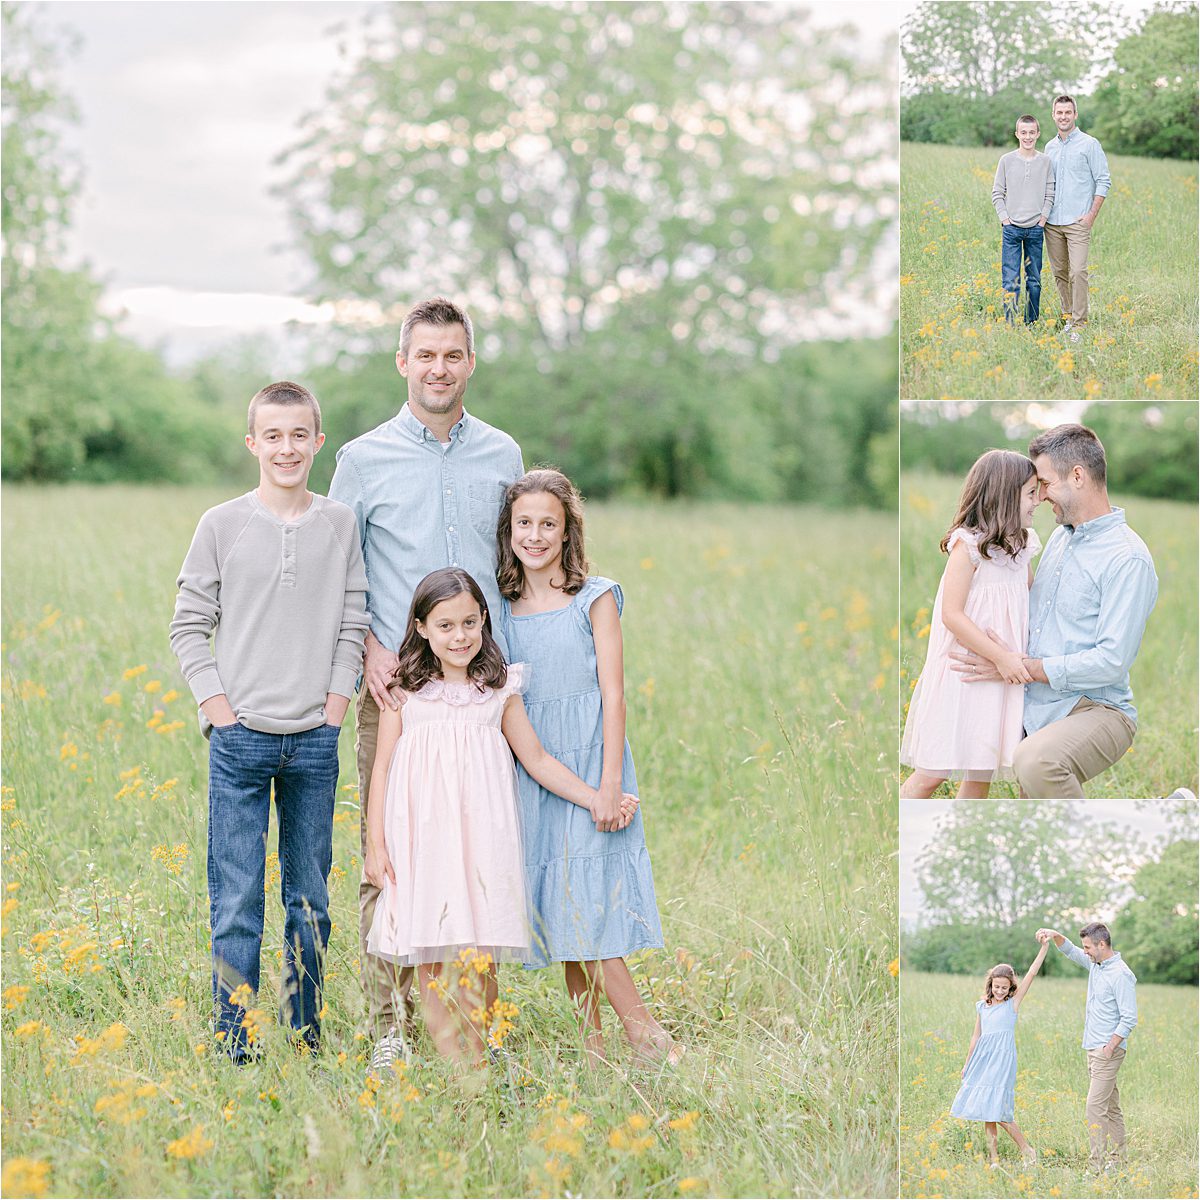 Photos of a dad with his children in a Spring wildflower field near Athens, GA.